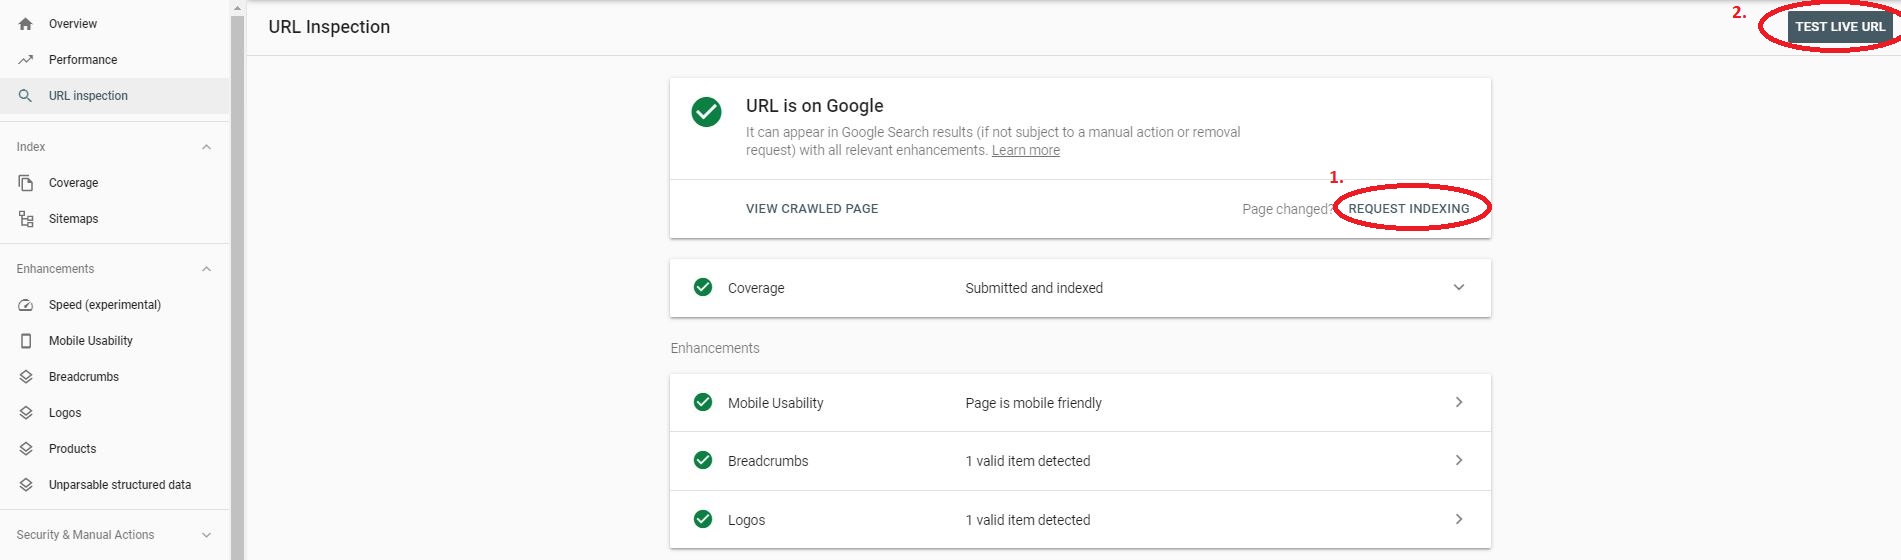 Search Console URLs page